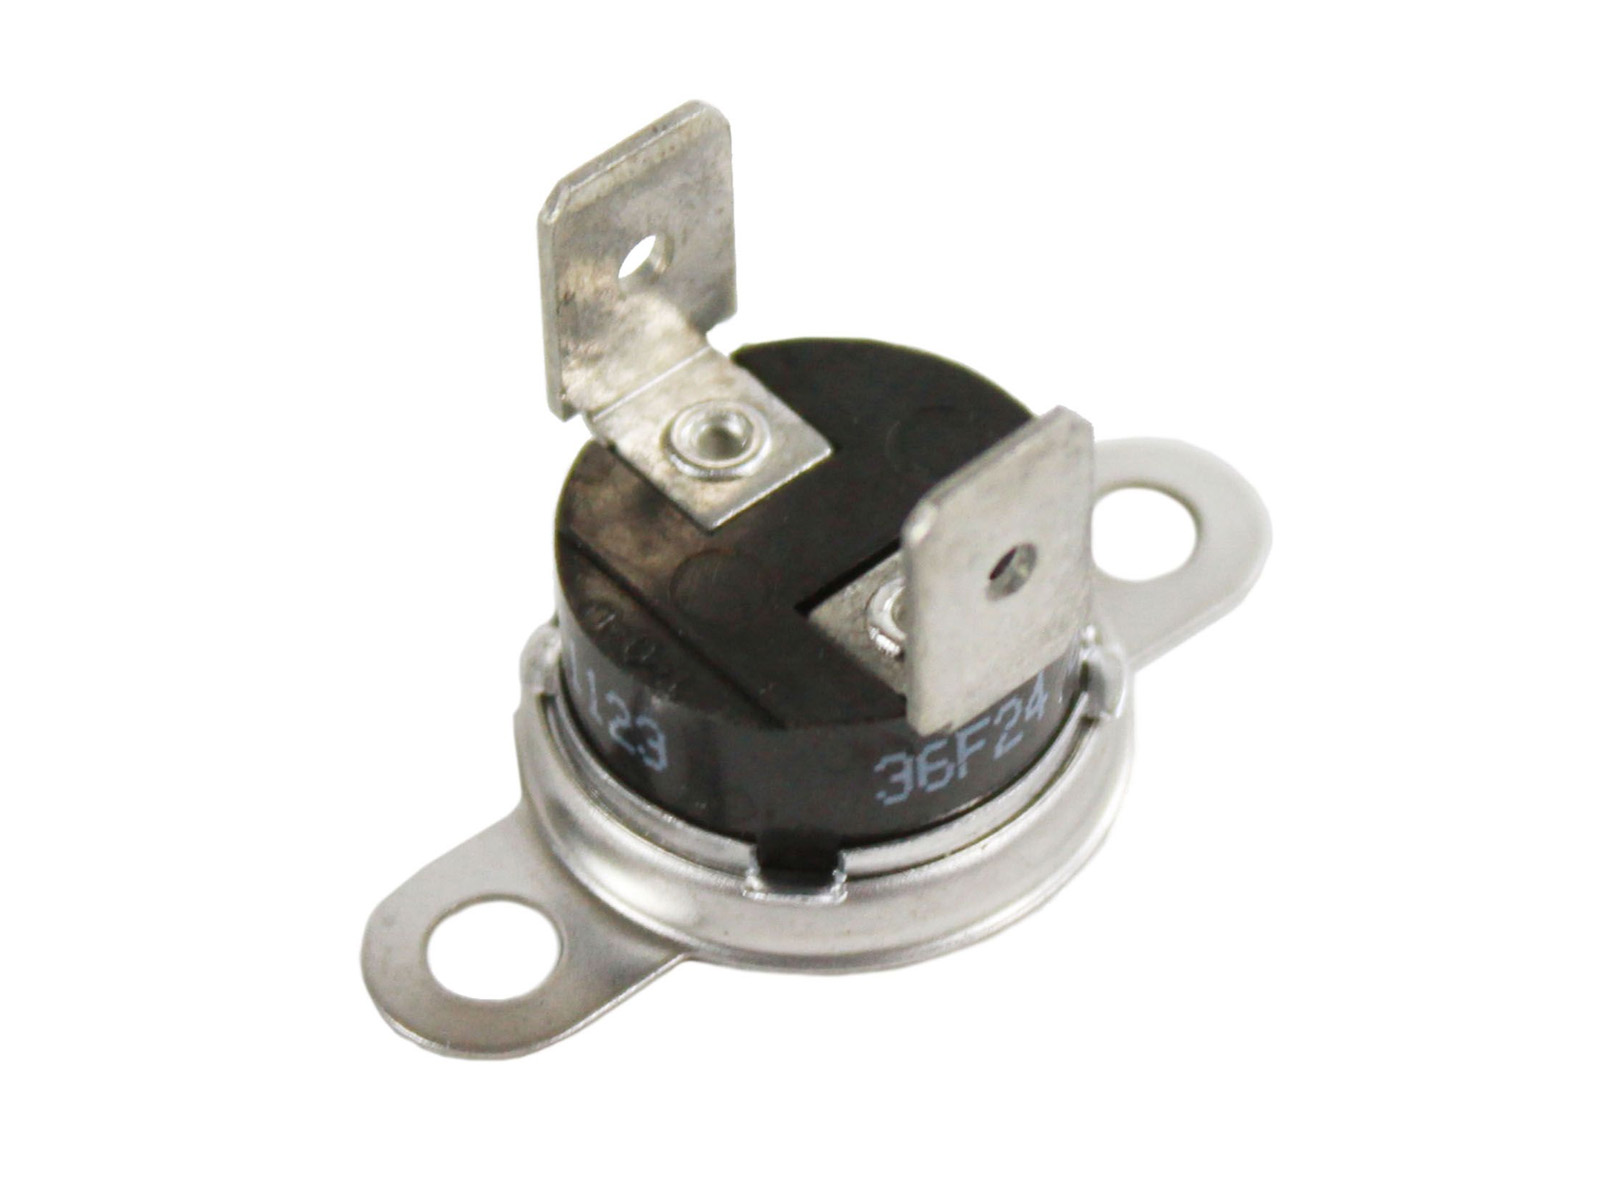 ClimaTek Upgraded Dryer Thermal Limit Switch fits Sears 3205659 5303209192 AH419402